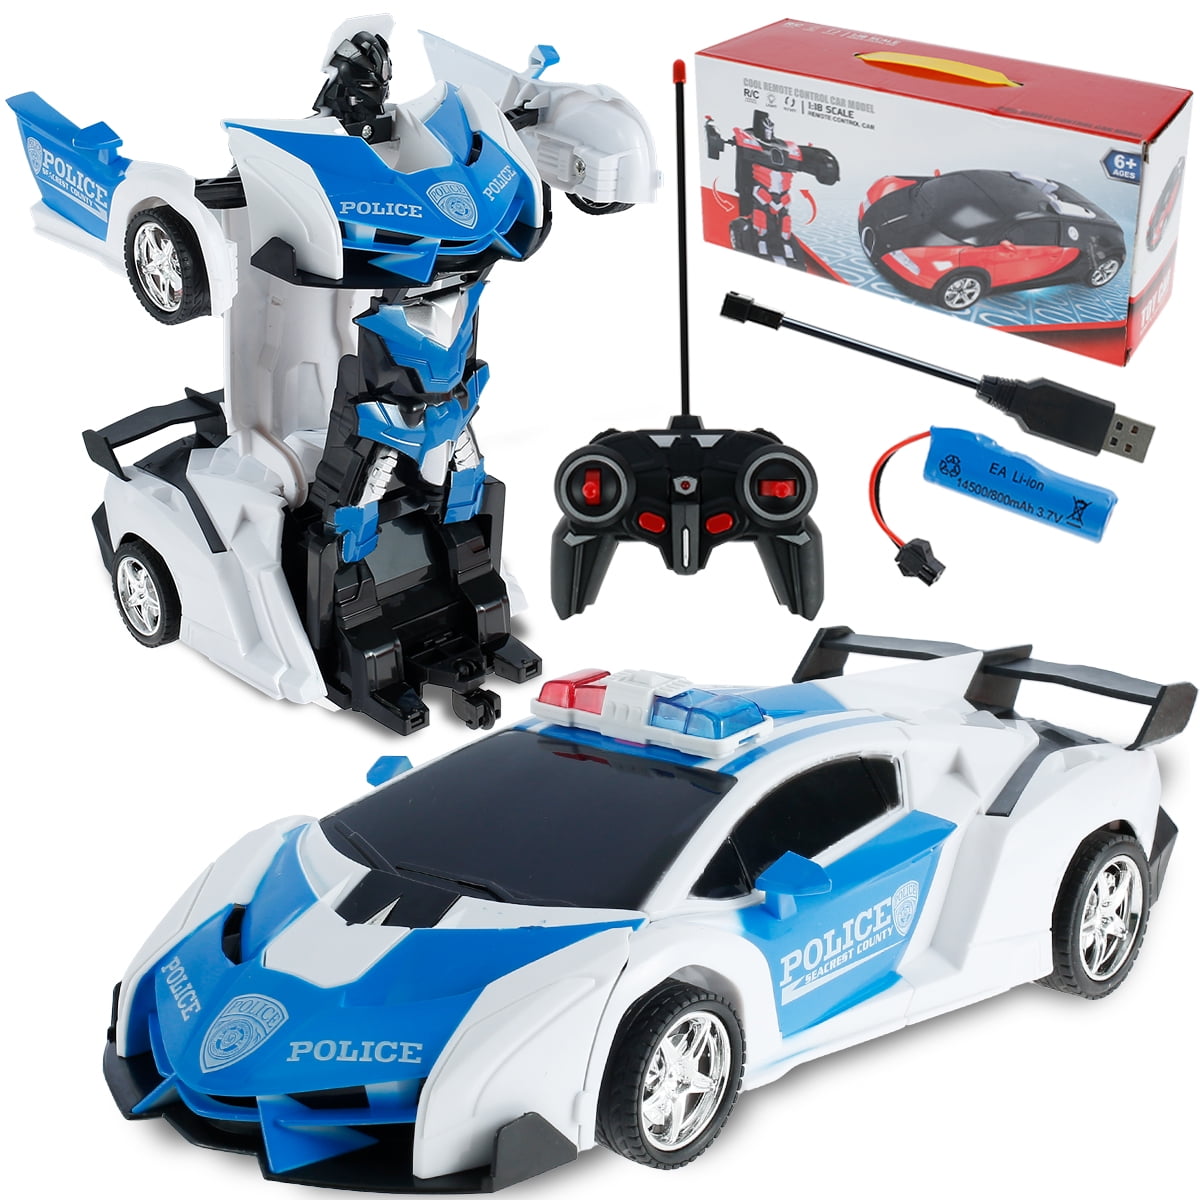 Totola Remote Control Transform Robot Kids Toys All Ages Boys & Girls Electronic RC Robot Deformation Car Vehicle Model Toy with One Button Transformation for Children 